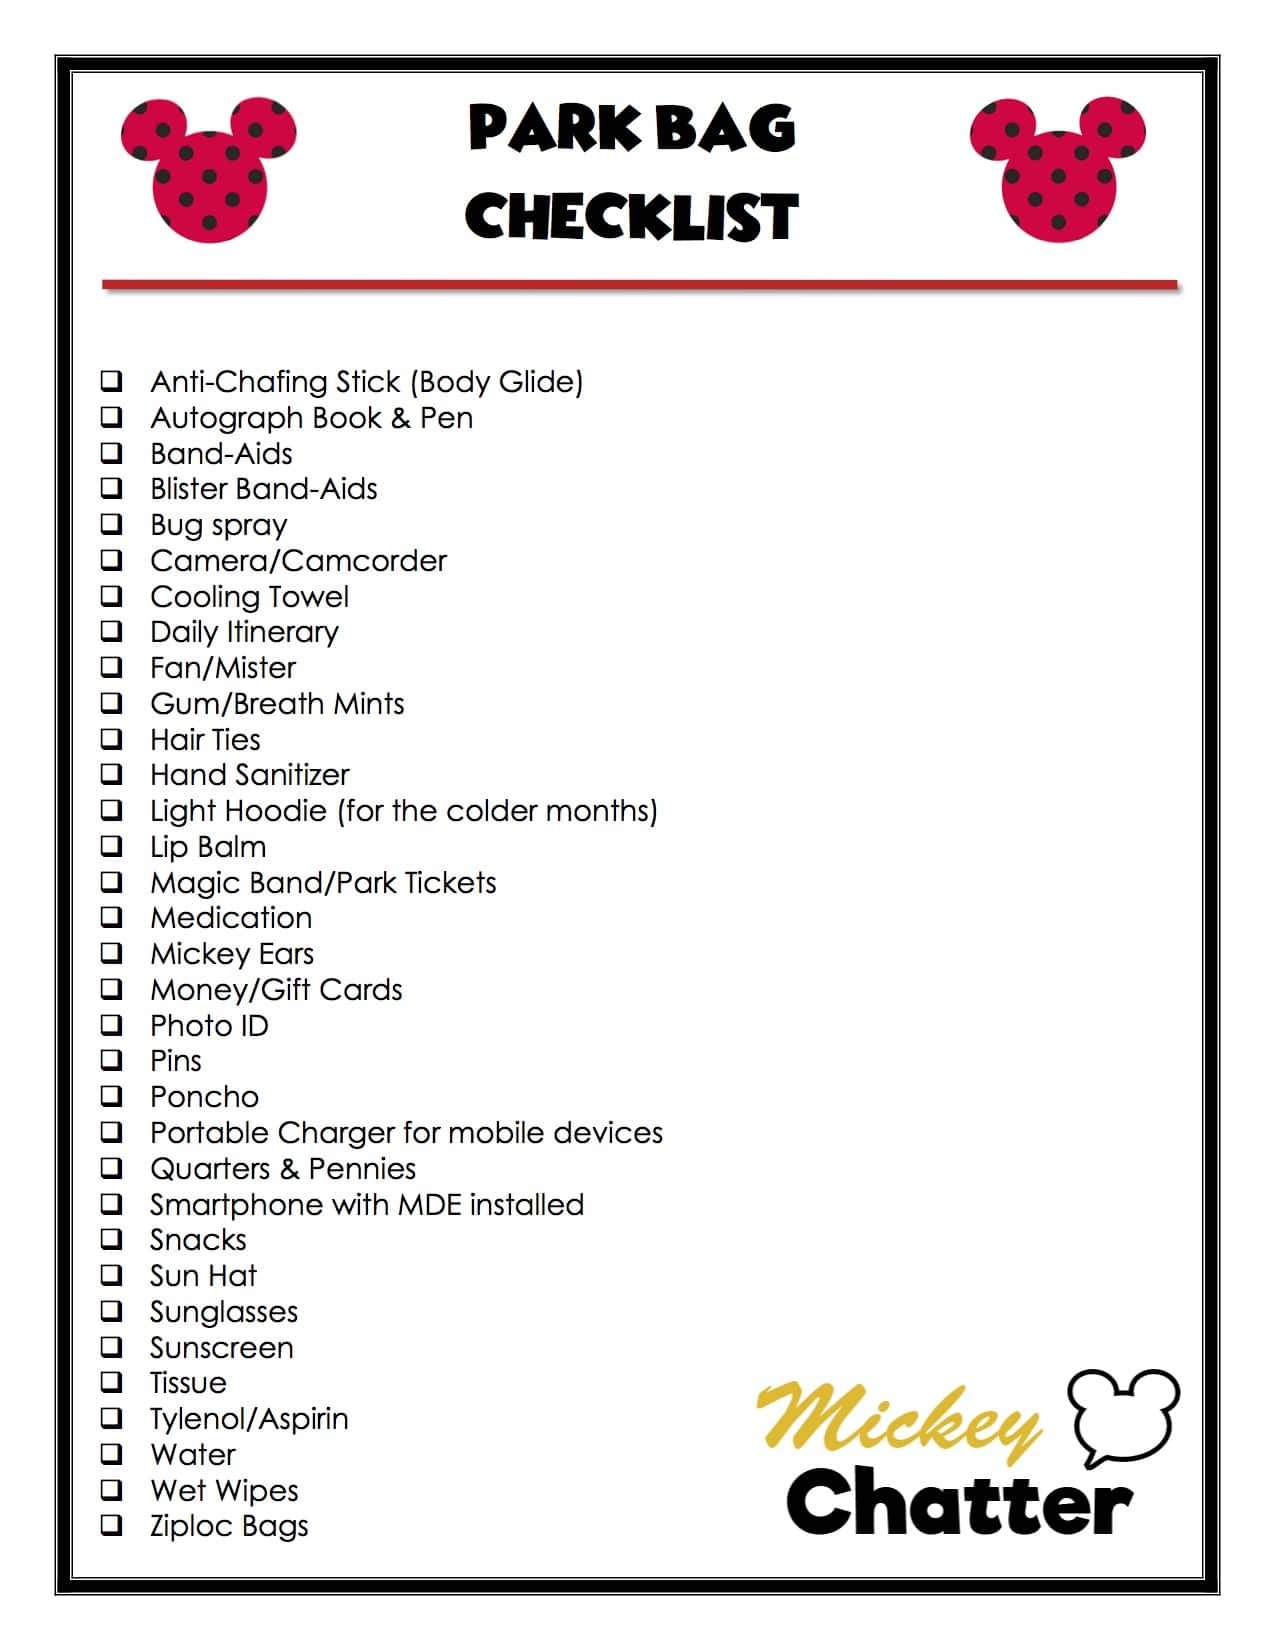 Disney Park Bag Checklist - A printable list so that you can make sure you have everything you need in your Disney park bag.